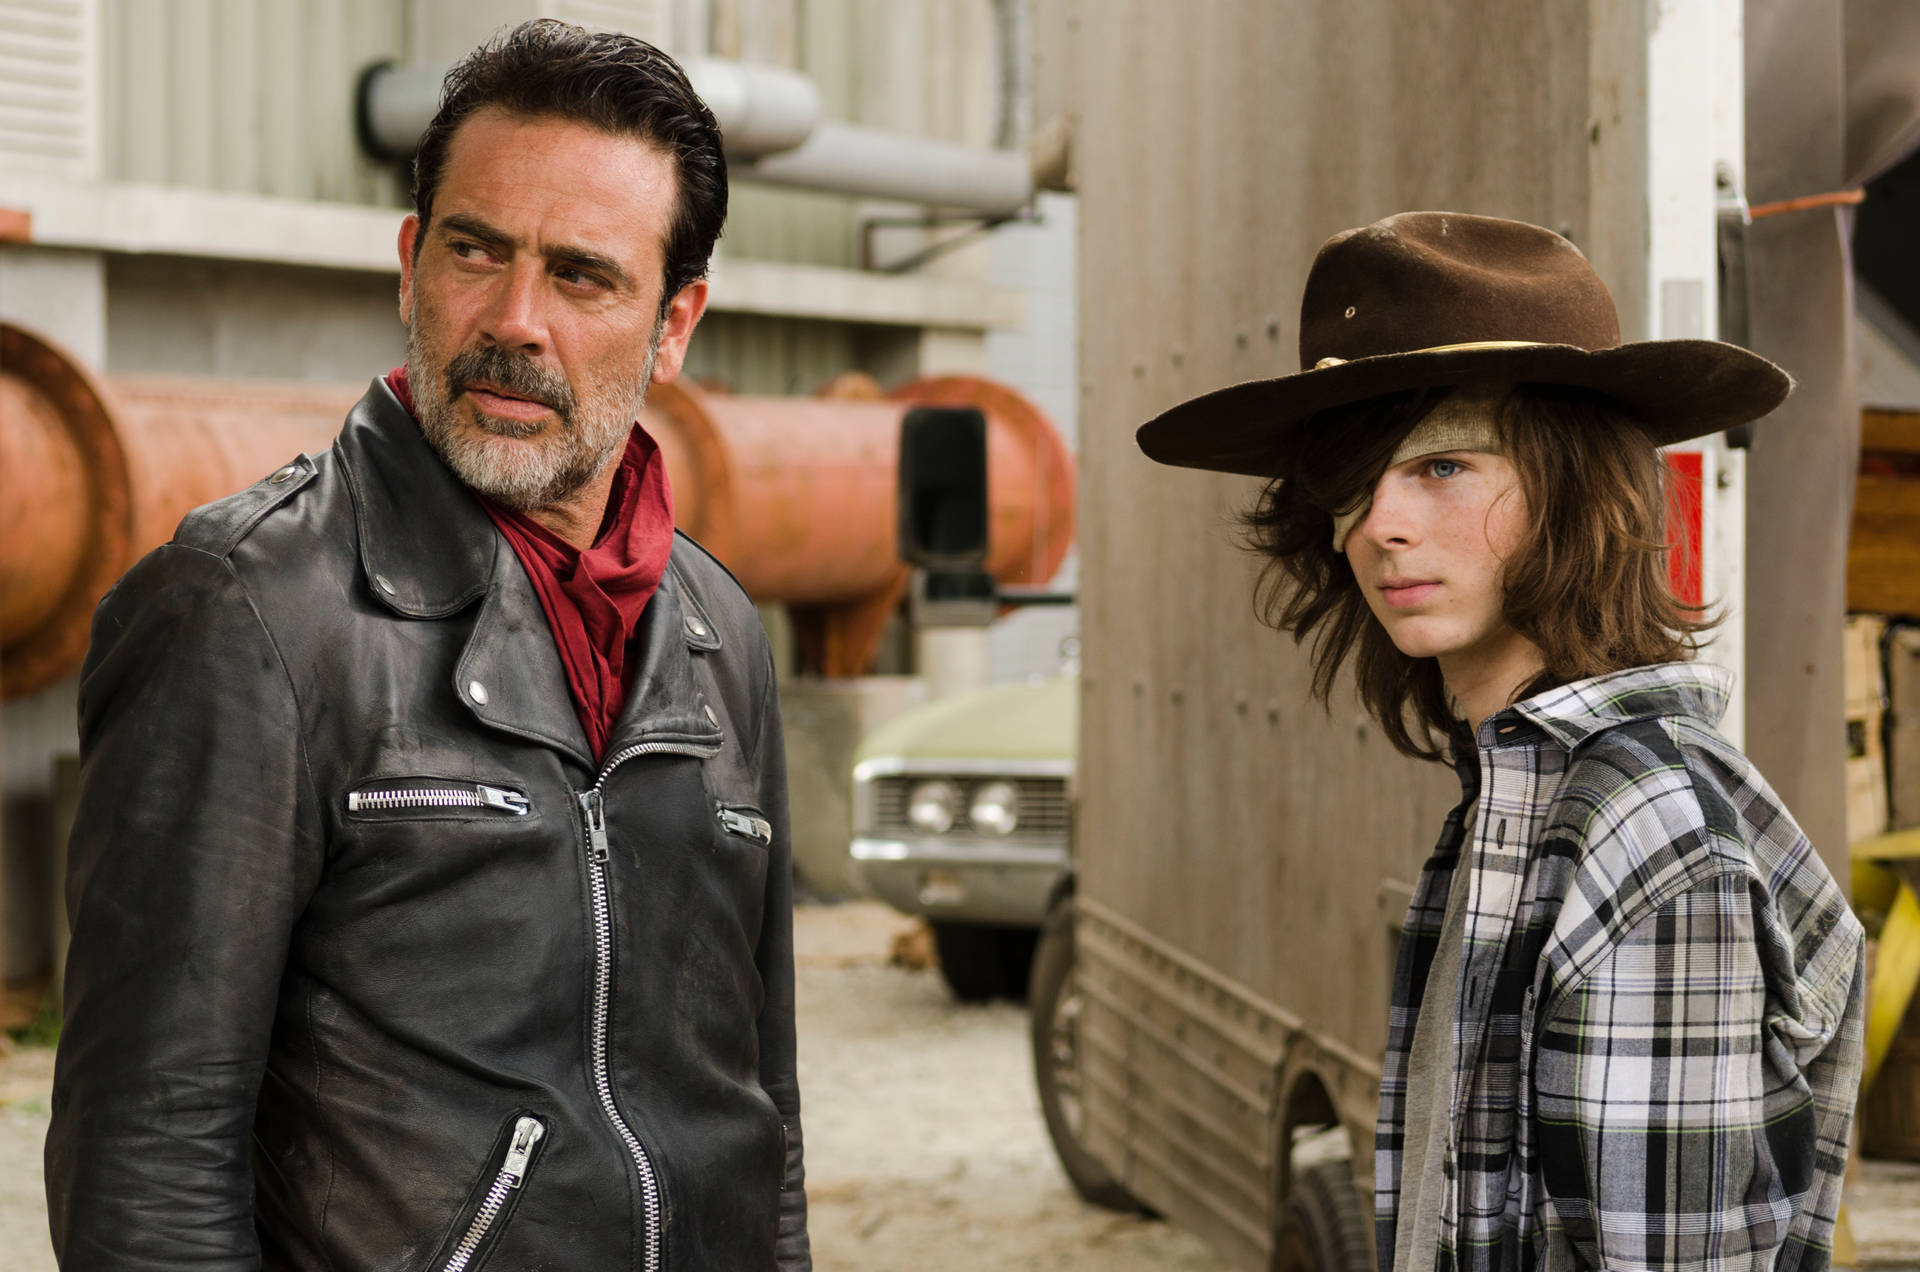 Negan And Carl Standing Together